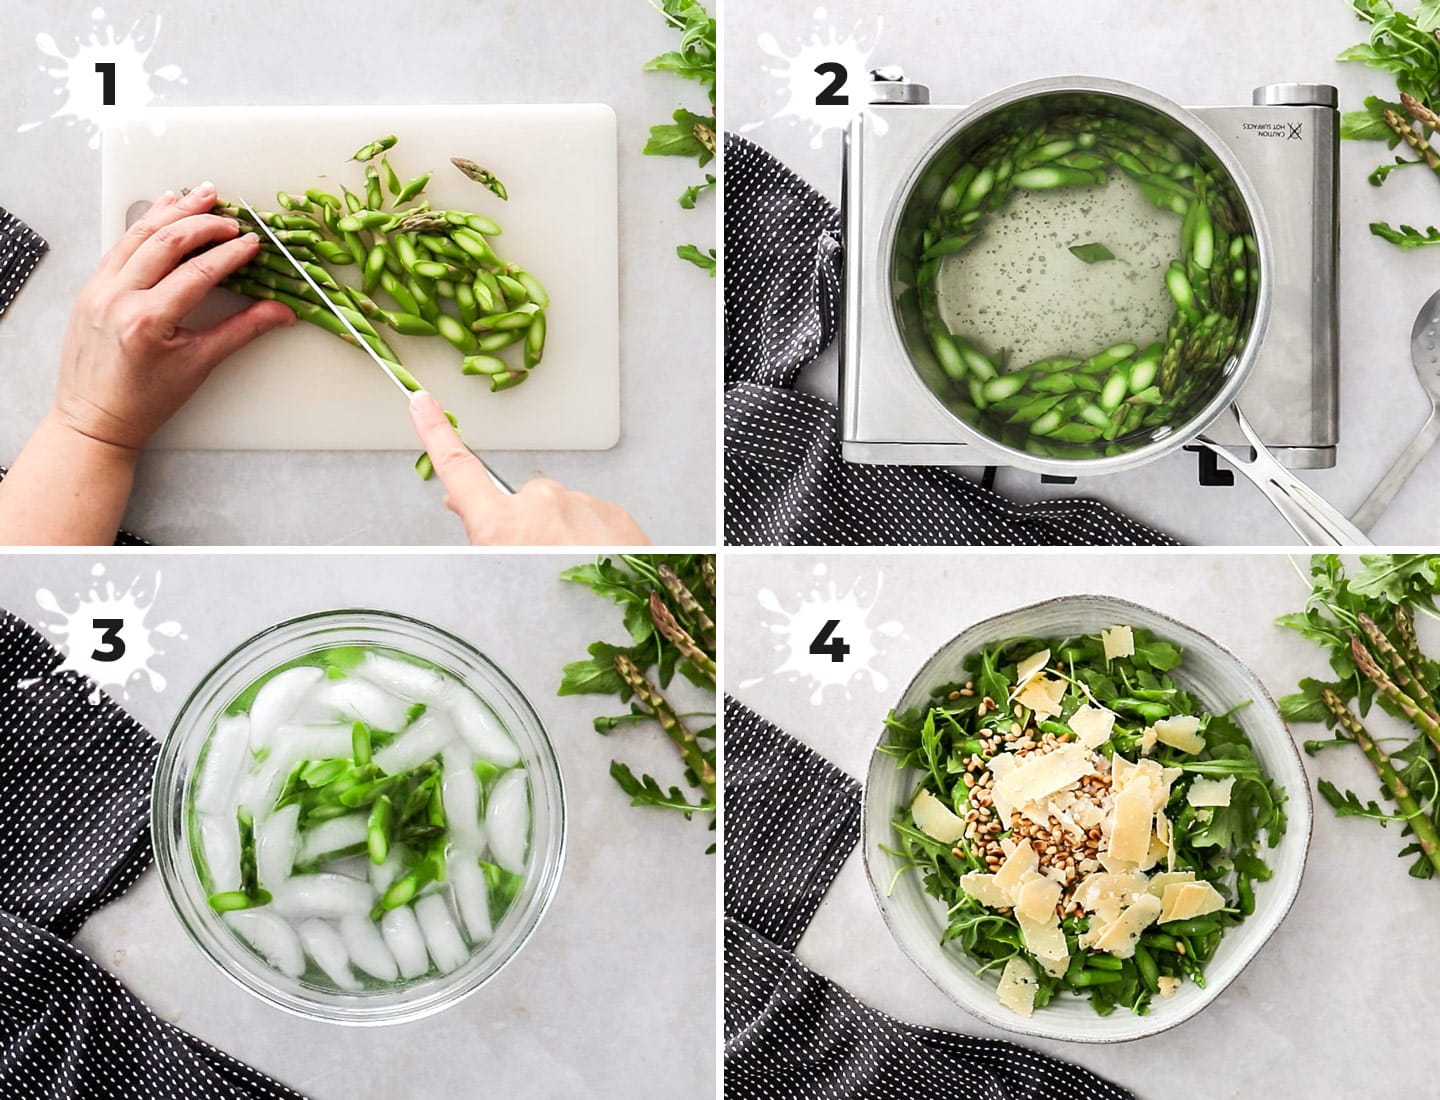 A collage of 4 images showing how to make rocket and parmesan salad.